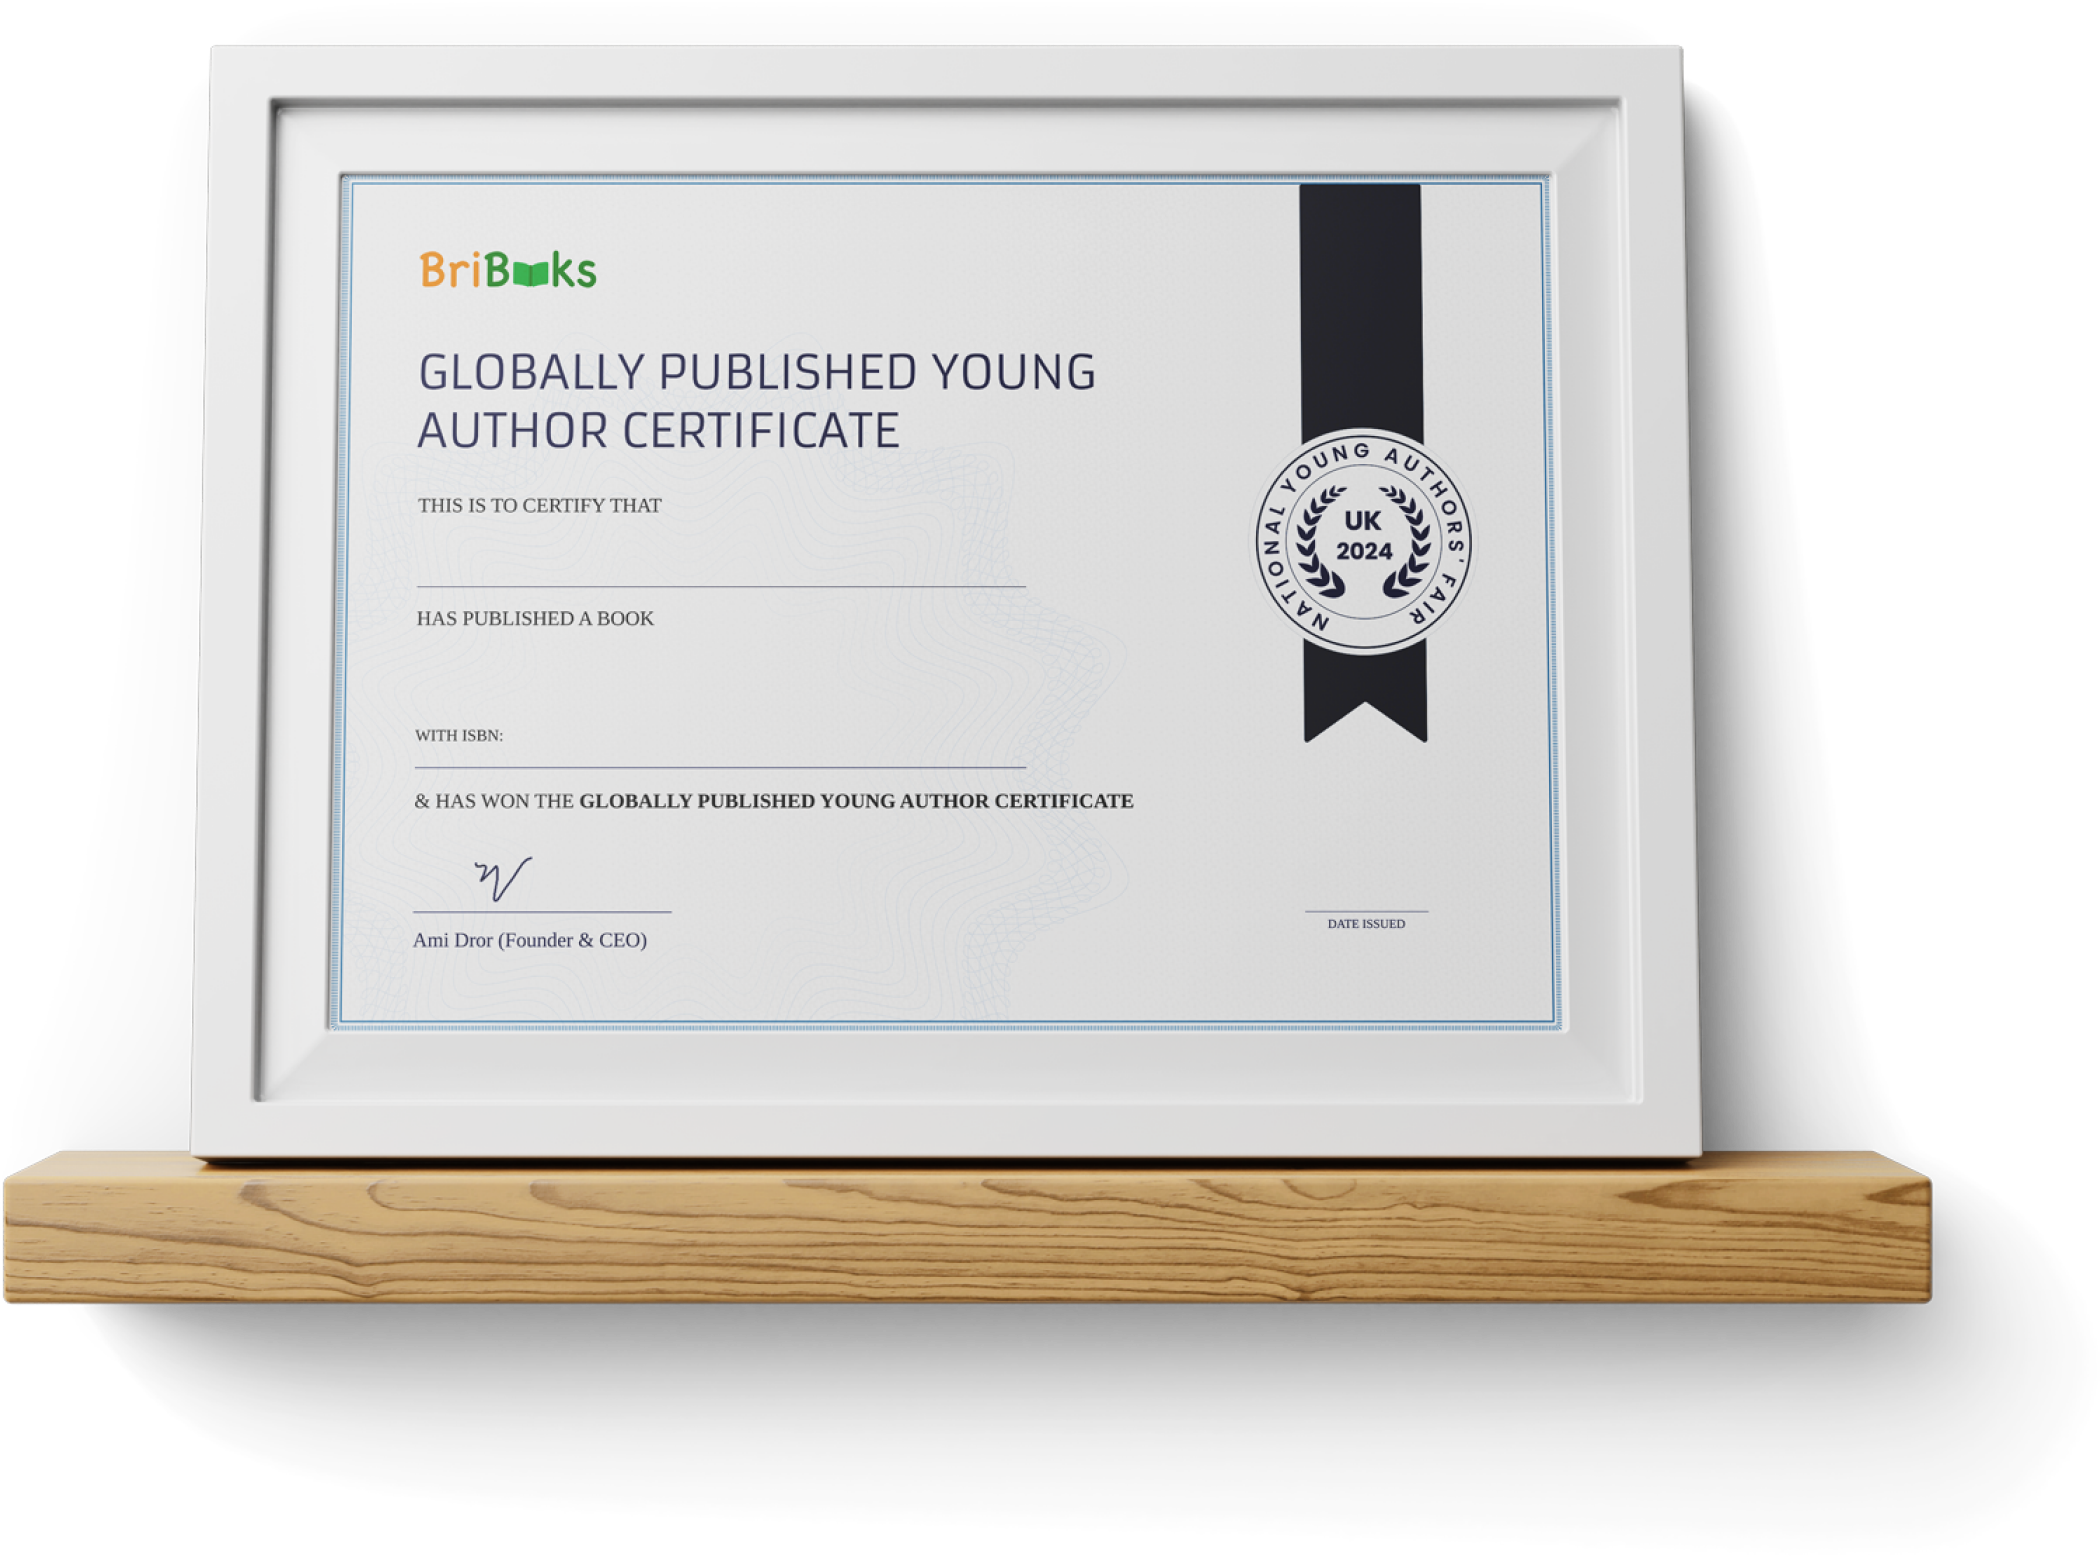 Globally Published Young Author Certificate & Amazon Global Listing